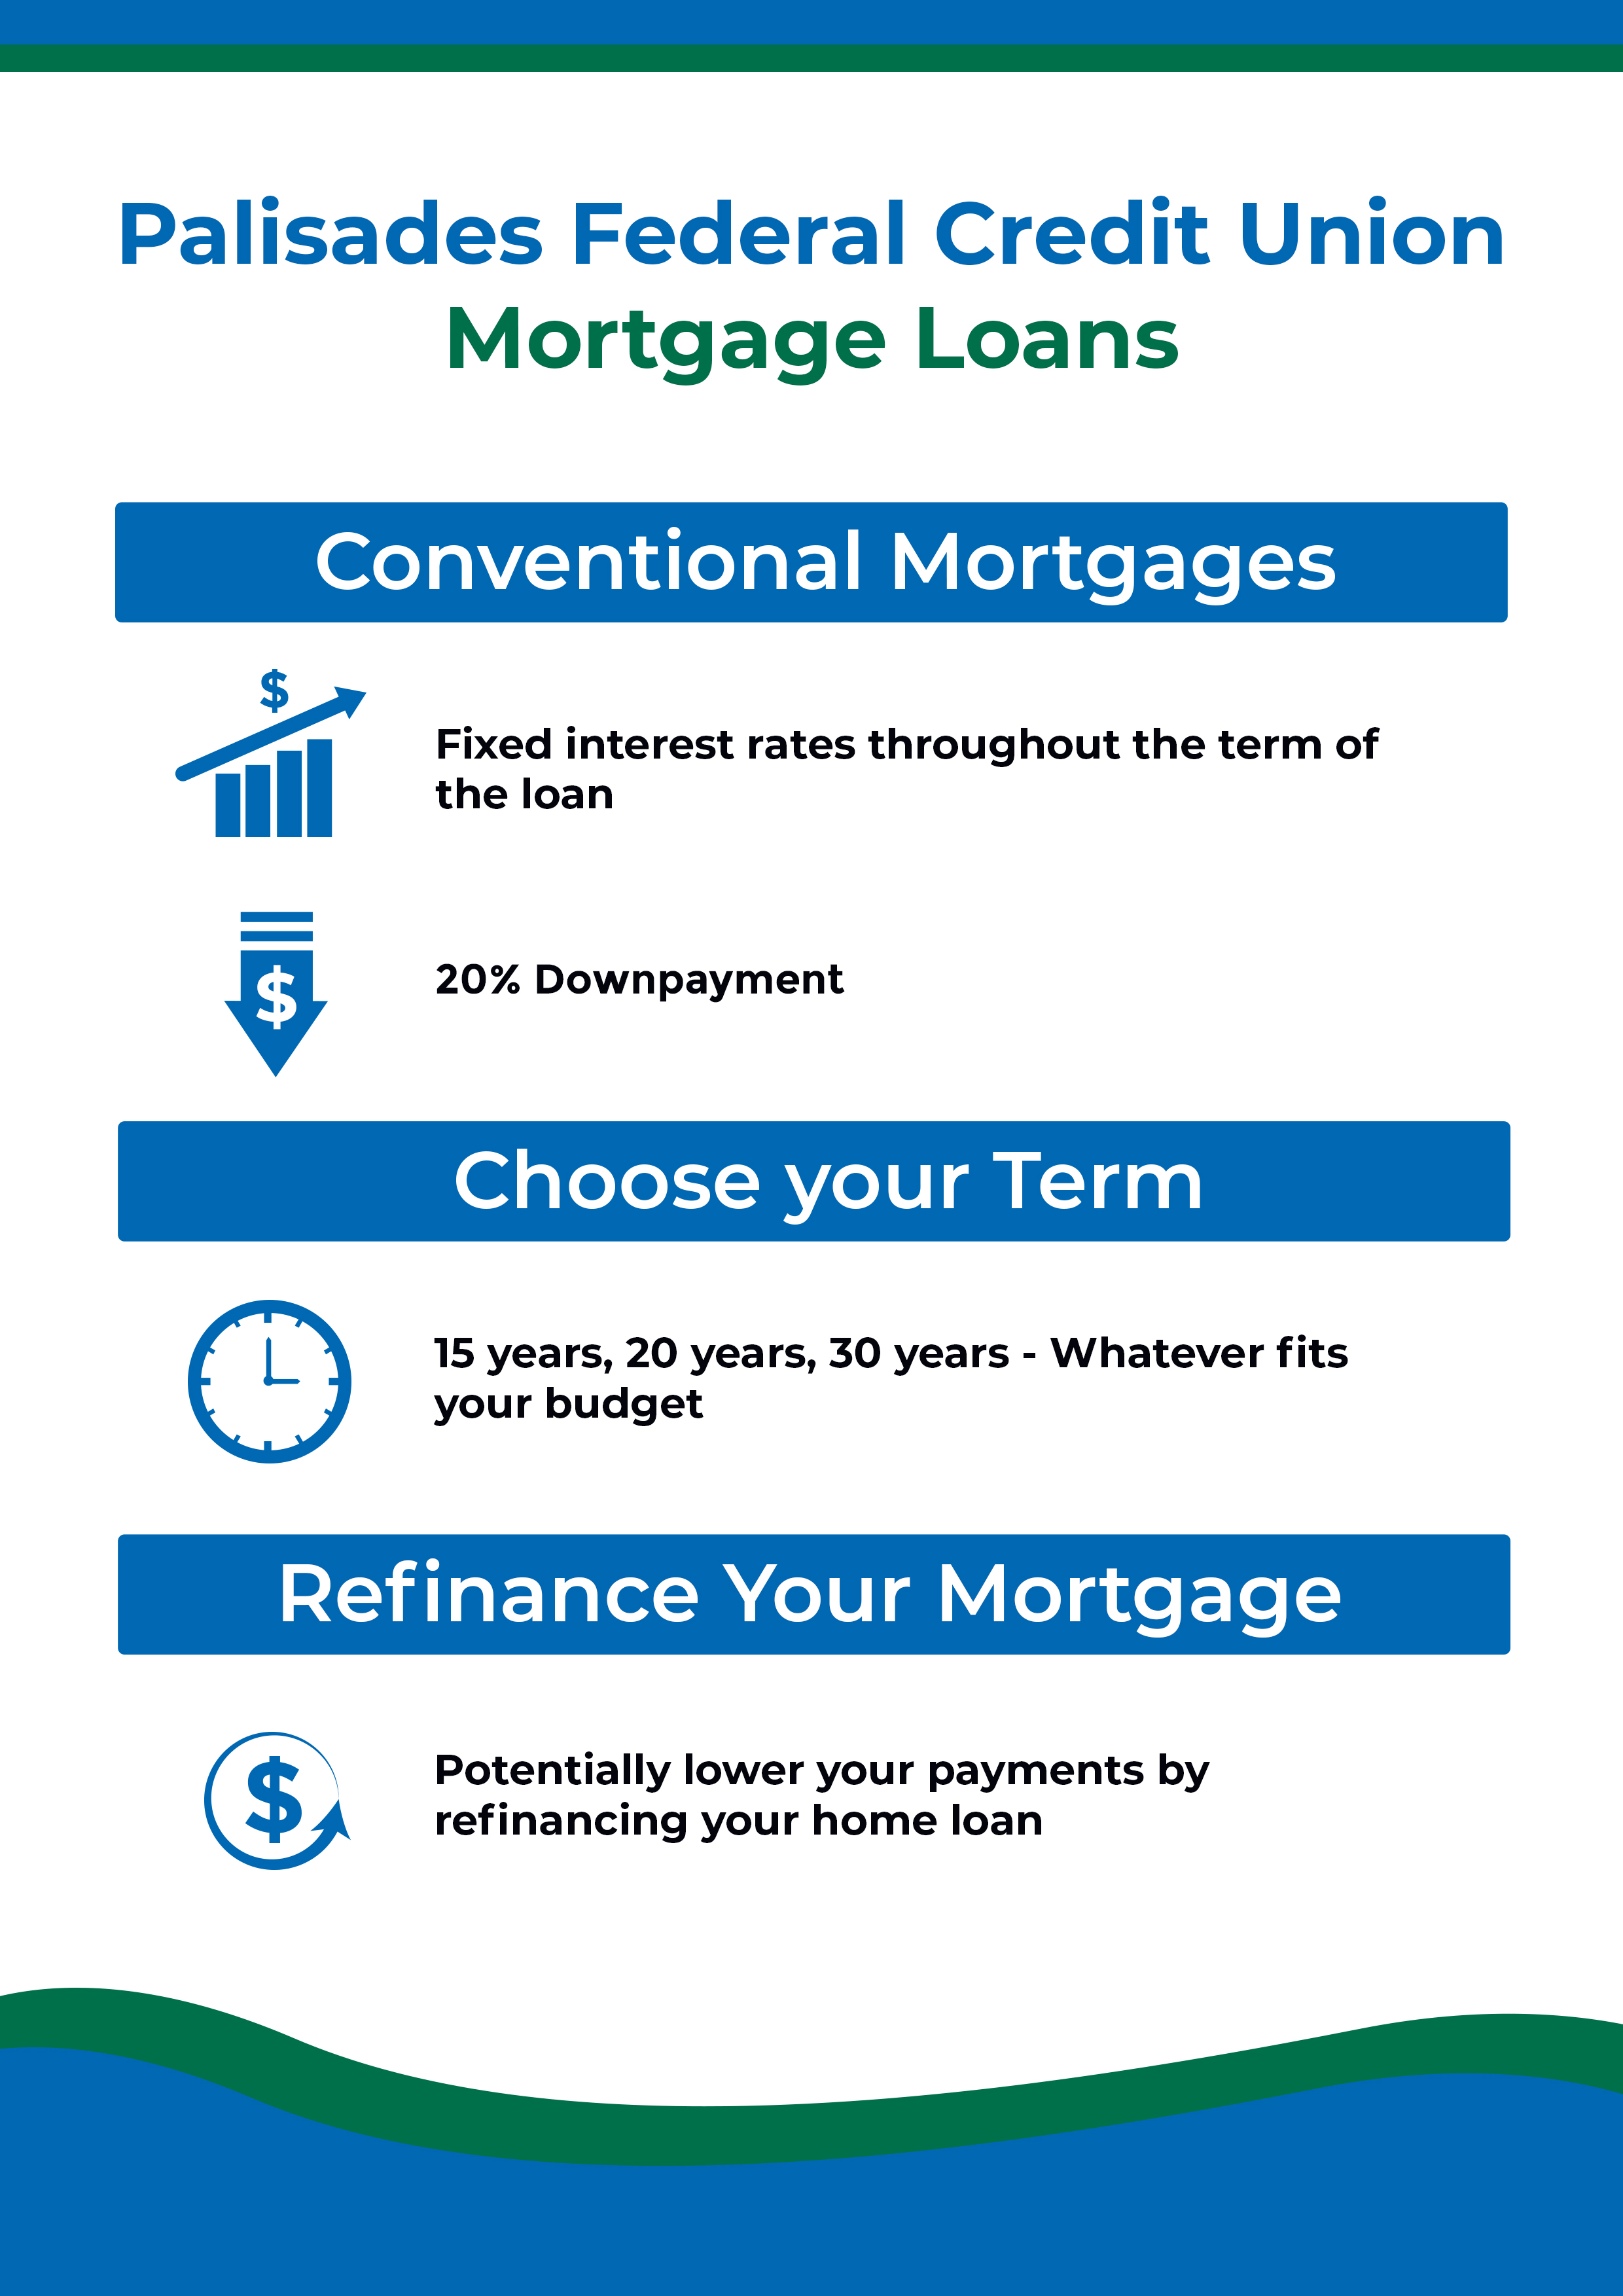      Palisades Federal Credit union Mortgage Loans - Choose Your Mortgage Type:  Conventional Mortgage - Fixed interest rates throughout the term of the loan    Choose your Term:  15 years, 20 years, 30 years - Whatever fits your budget    Refinance Your Mortgage - Potentially lower your payments by refinancing your home loan